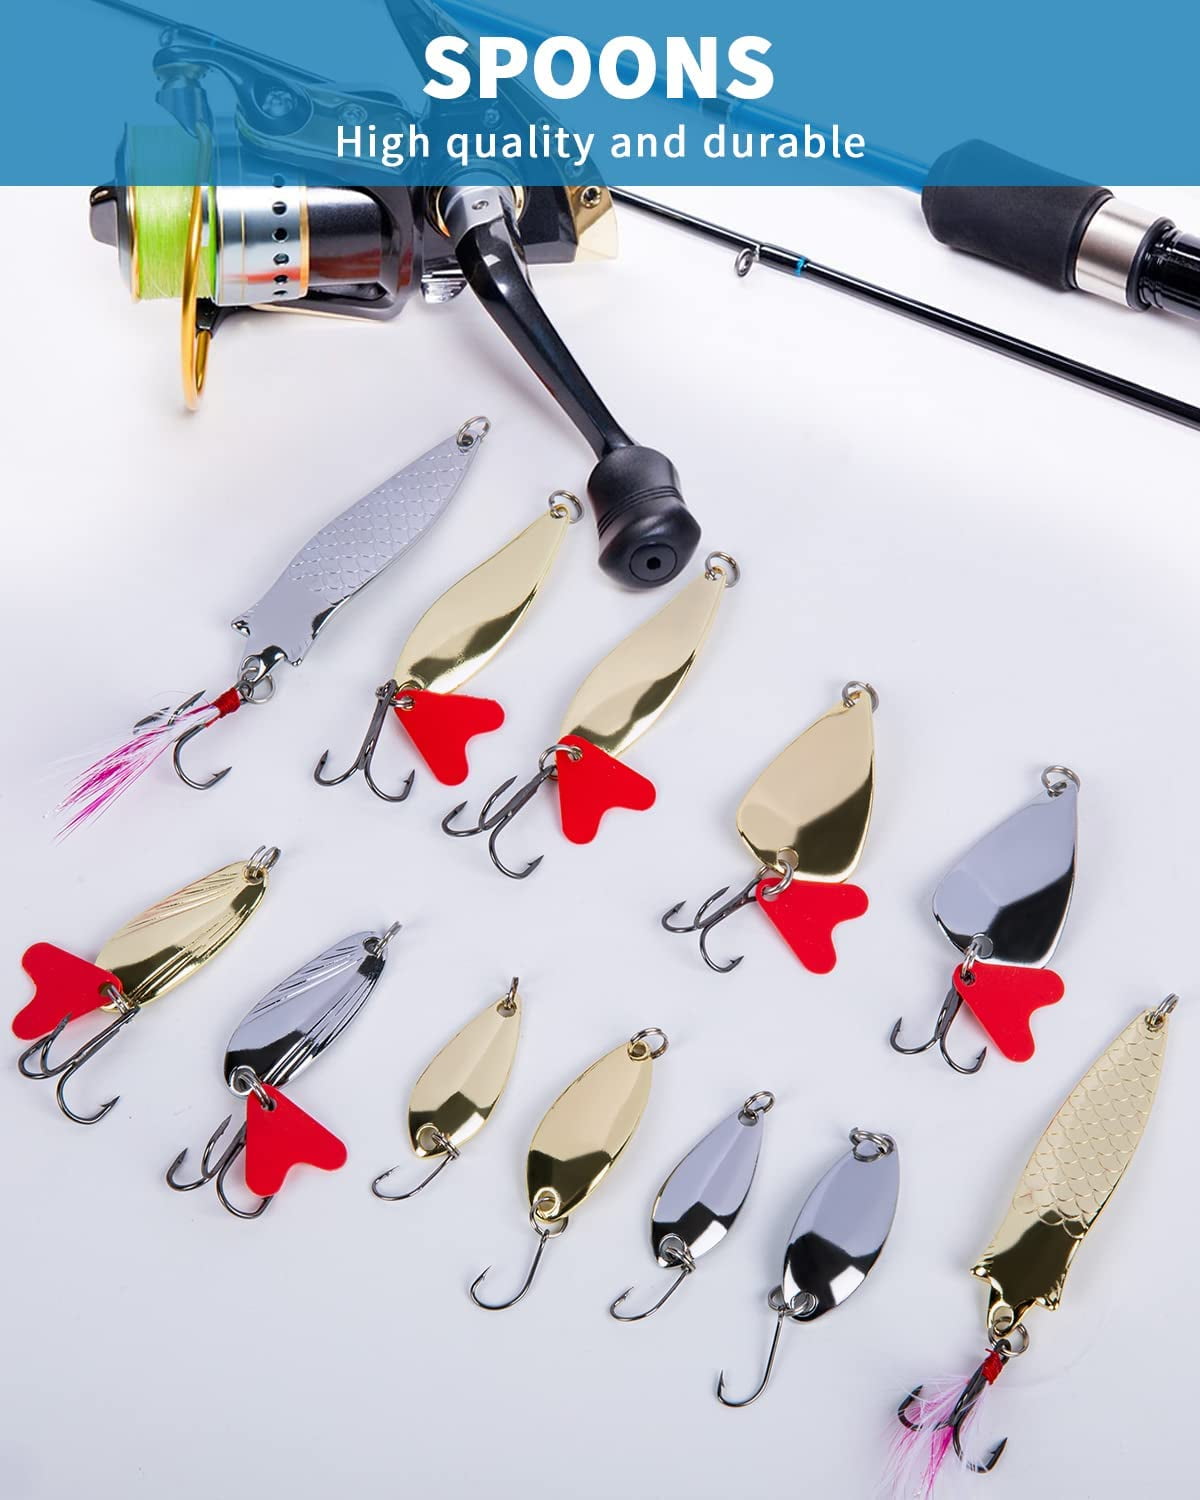  Sampler Bundle - Assorted Fishing Lures And Soft Baits For Bass  Fishing - Includes Bandito Bug And Blazin Worm - Essential Fishing Gear And  Accessories For Your Tackle Box